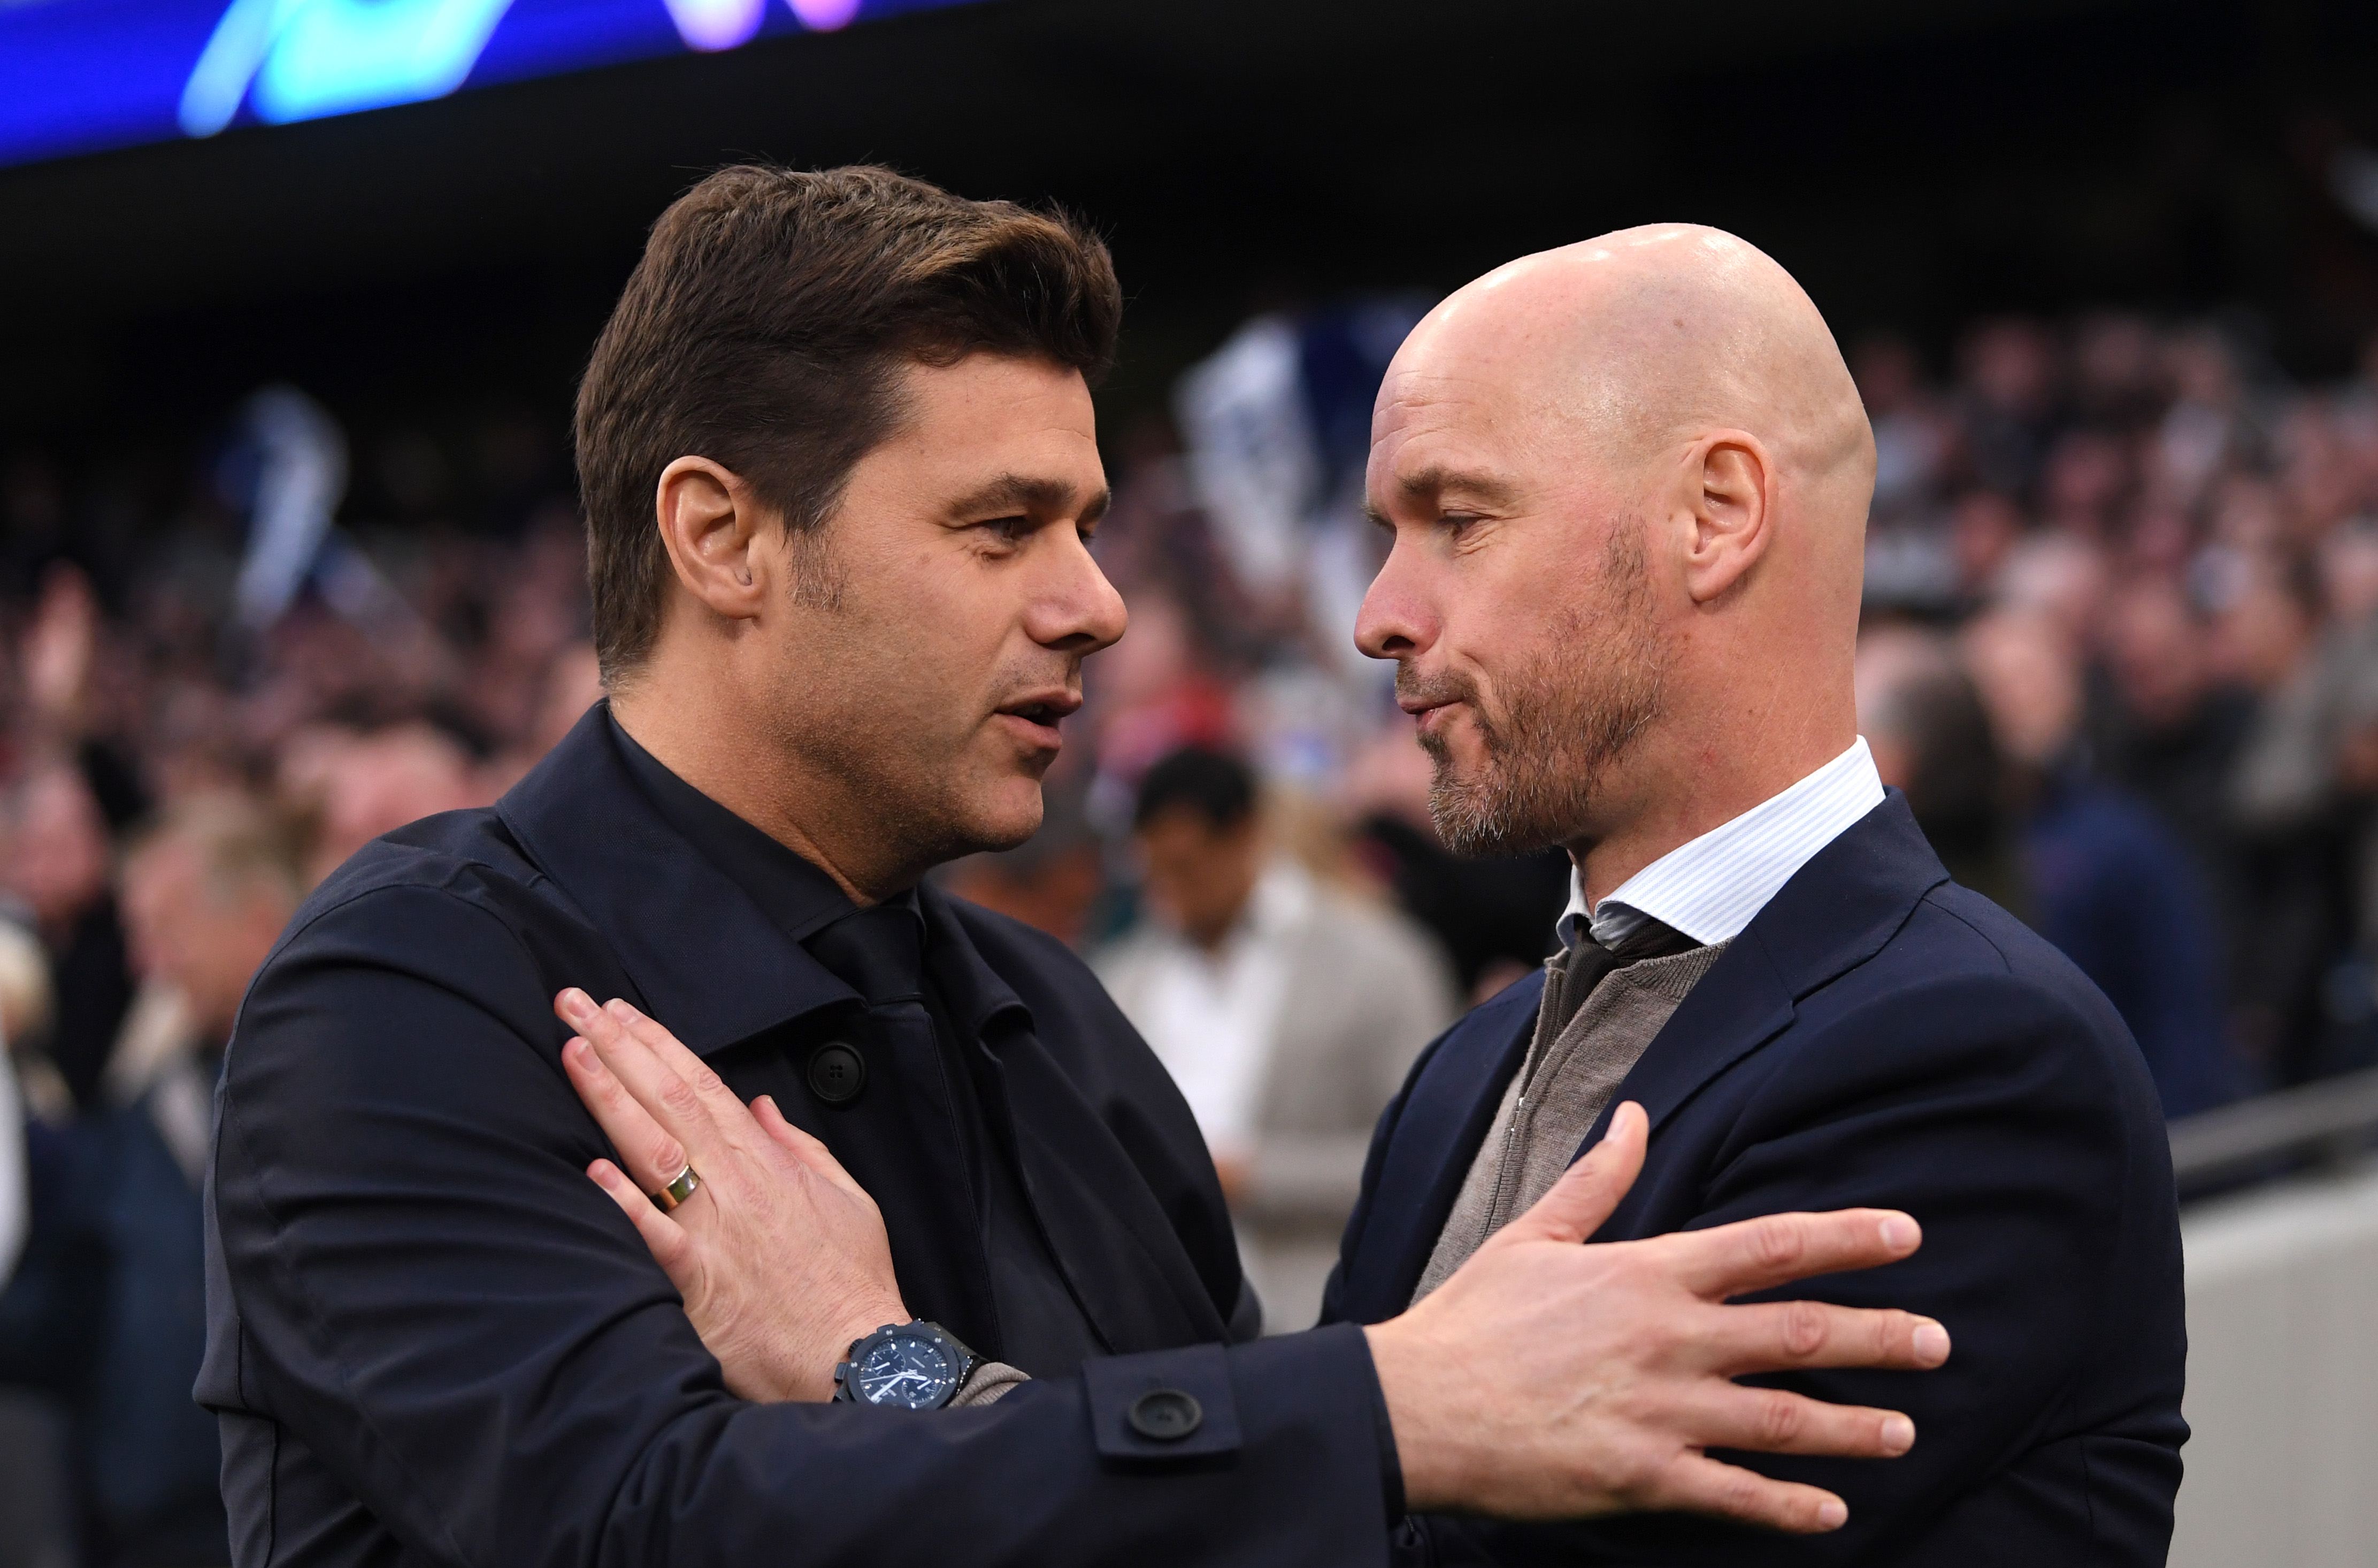 Pochettino was also one of the prime contenders to take over at Manchester United (Photo by Laurence Griffiths/Getty Images)